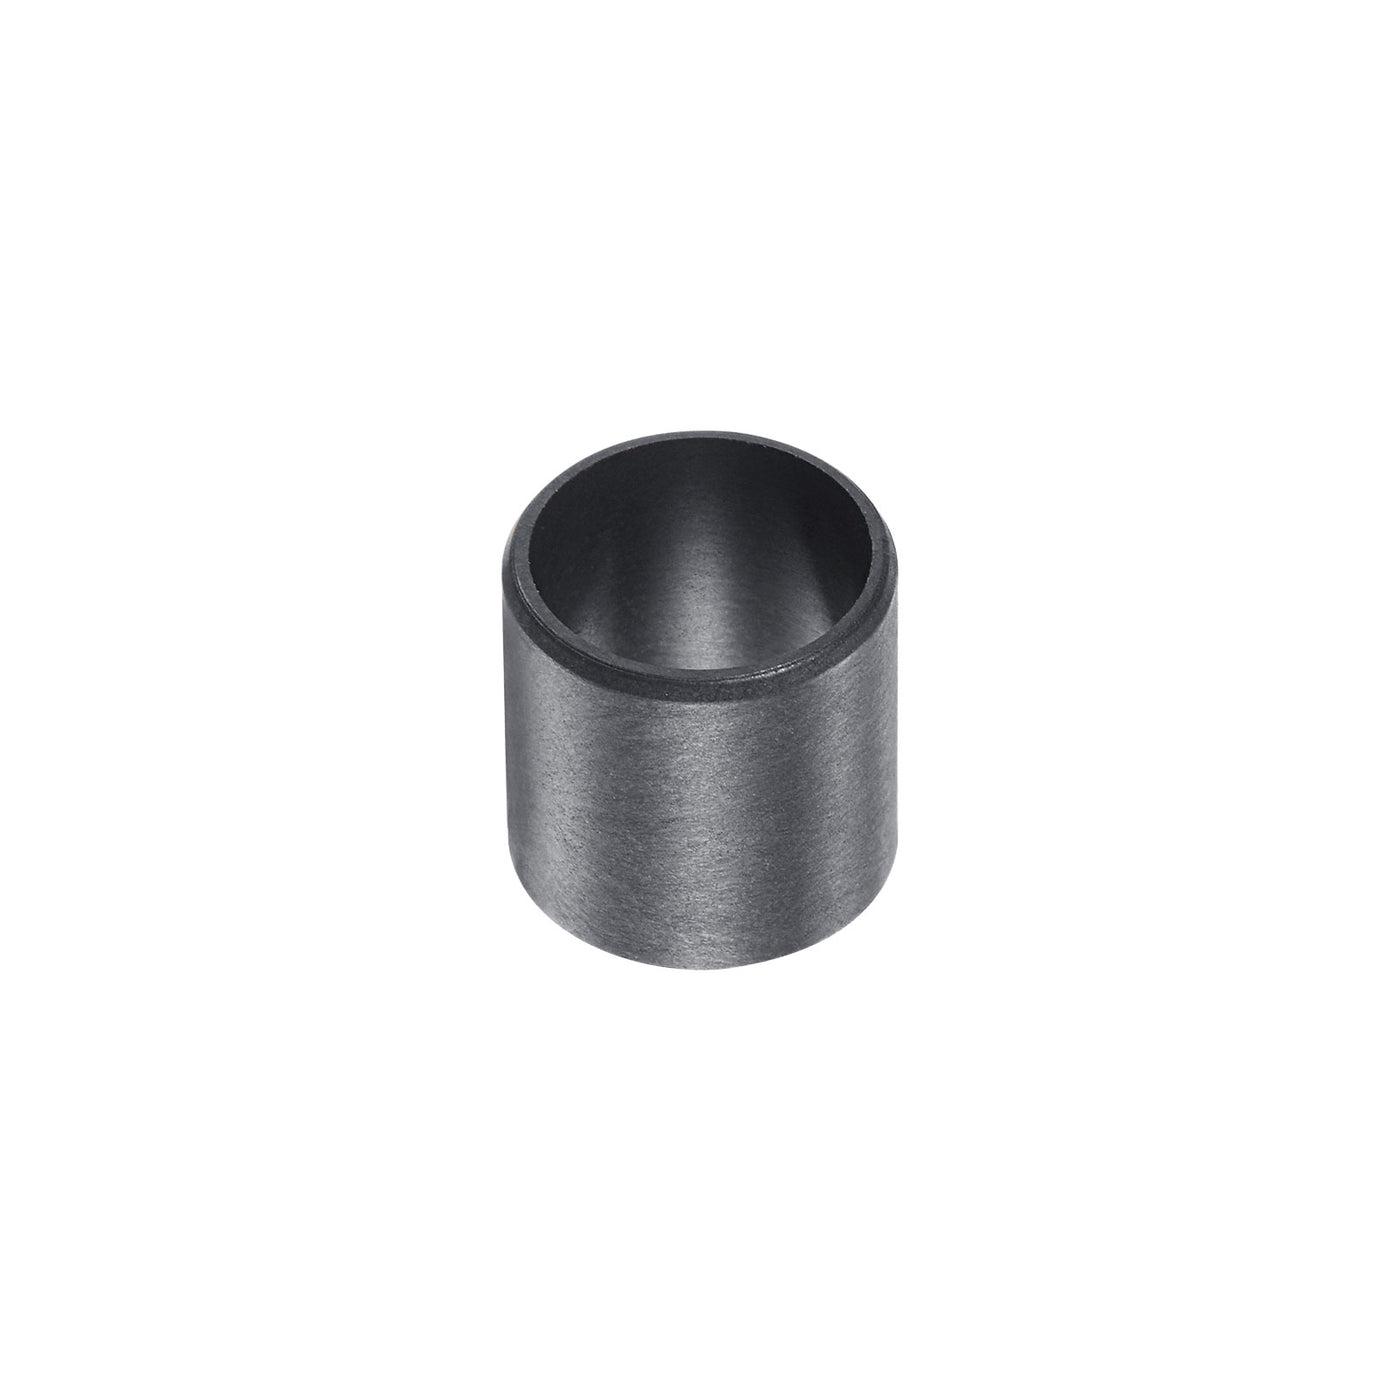 uxcell Uxcell Sleeve Bearings 12mmx14mmx12mm POM Wrapped Oilless Bushings Black